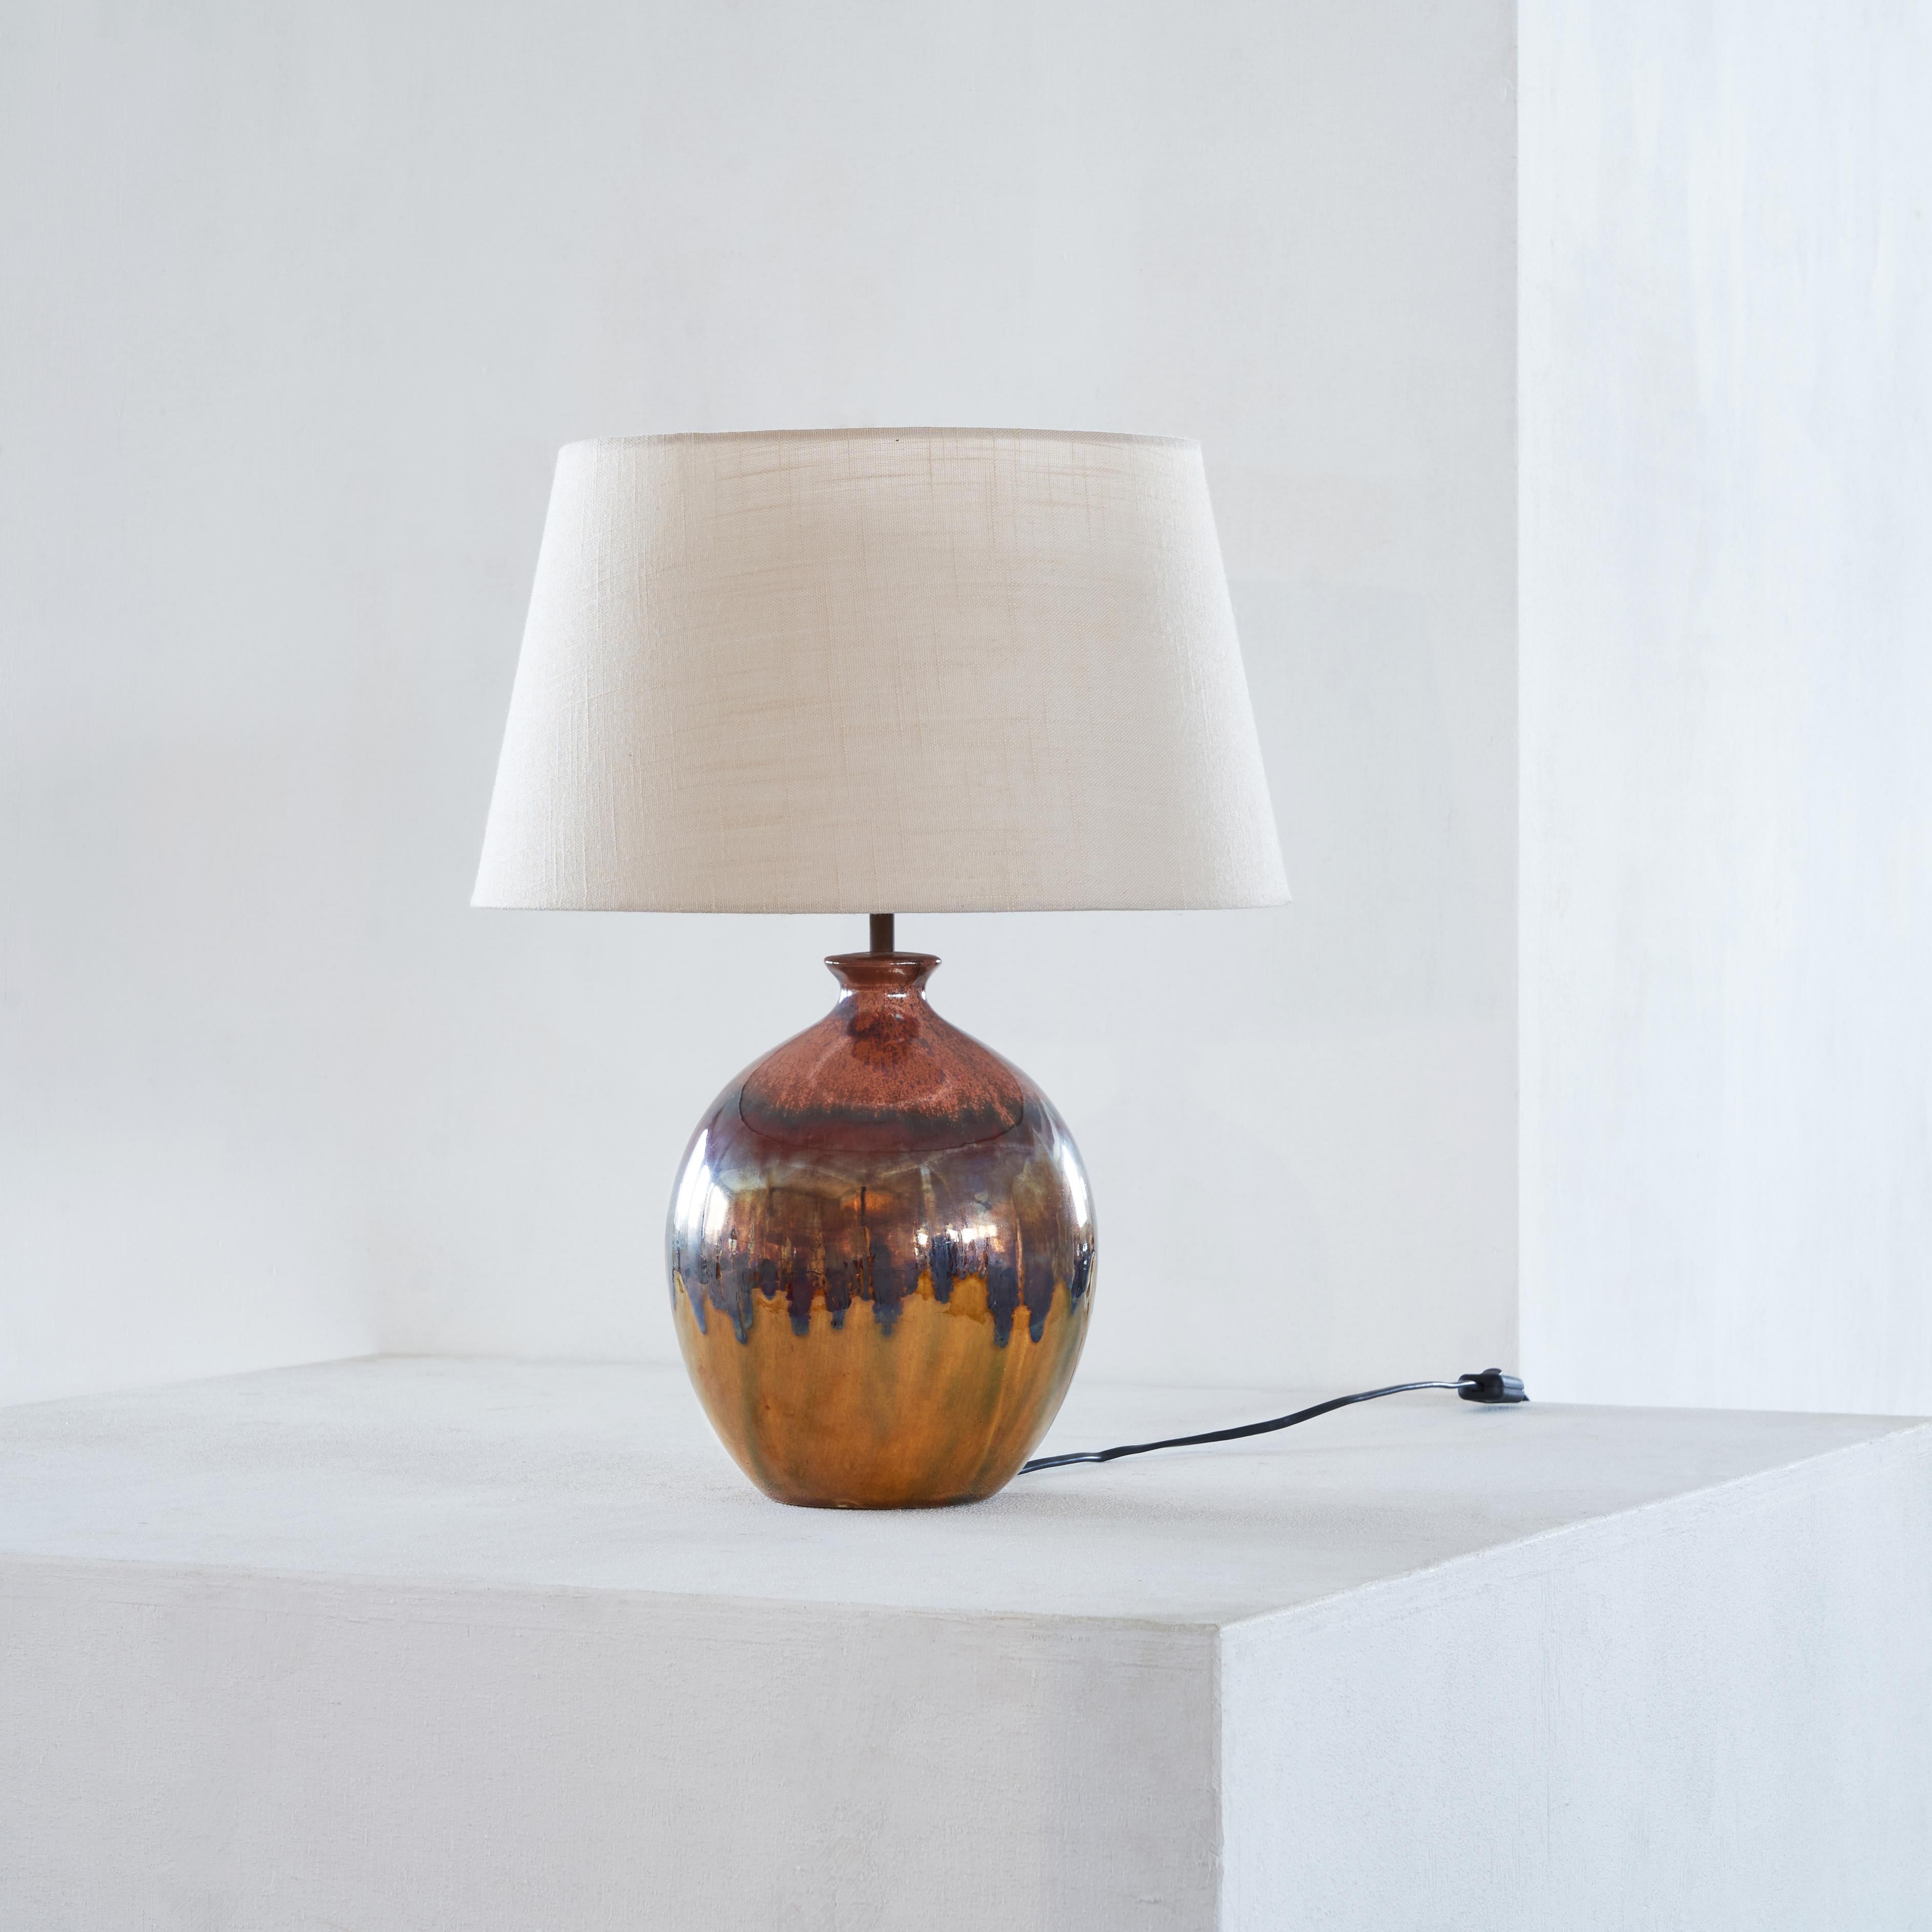 Drip Glazed Mid-Century Modern table lamp

This characteristic table lamp has a handmade ceramic spherical base, showing a drip glazed surface in different warm tones. The top of the base has a bottle like shape, holding the lighting element and